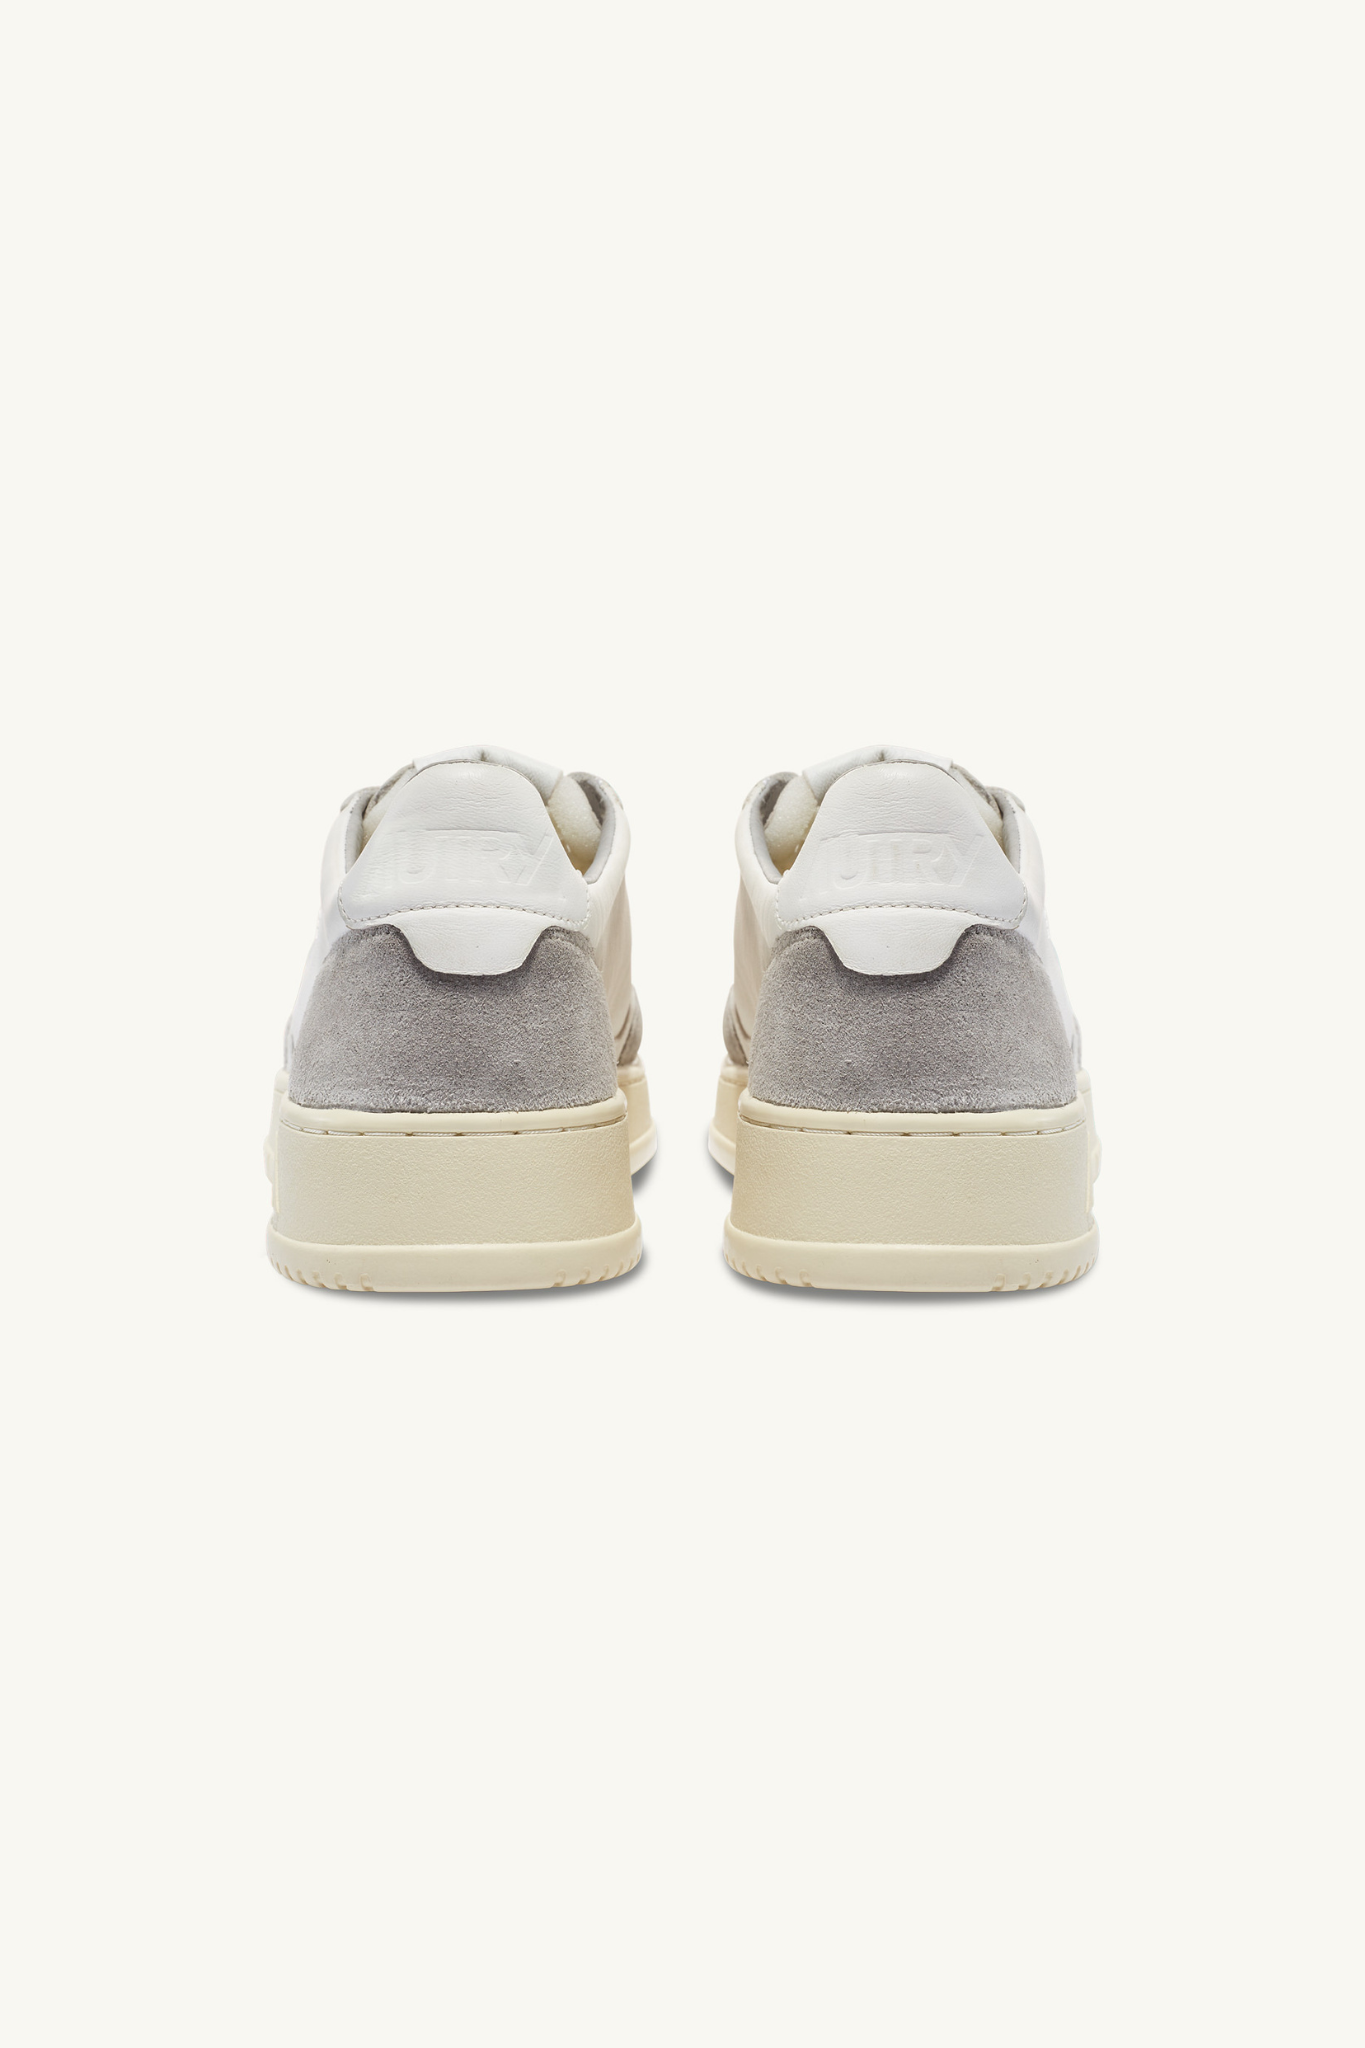 AULM-GS25 - MEDALIST LOW SNEAKERS IN WHITE GOATSKIN AND GRAY SUEDE